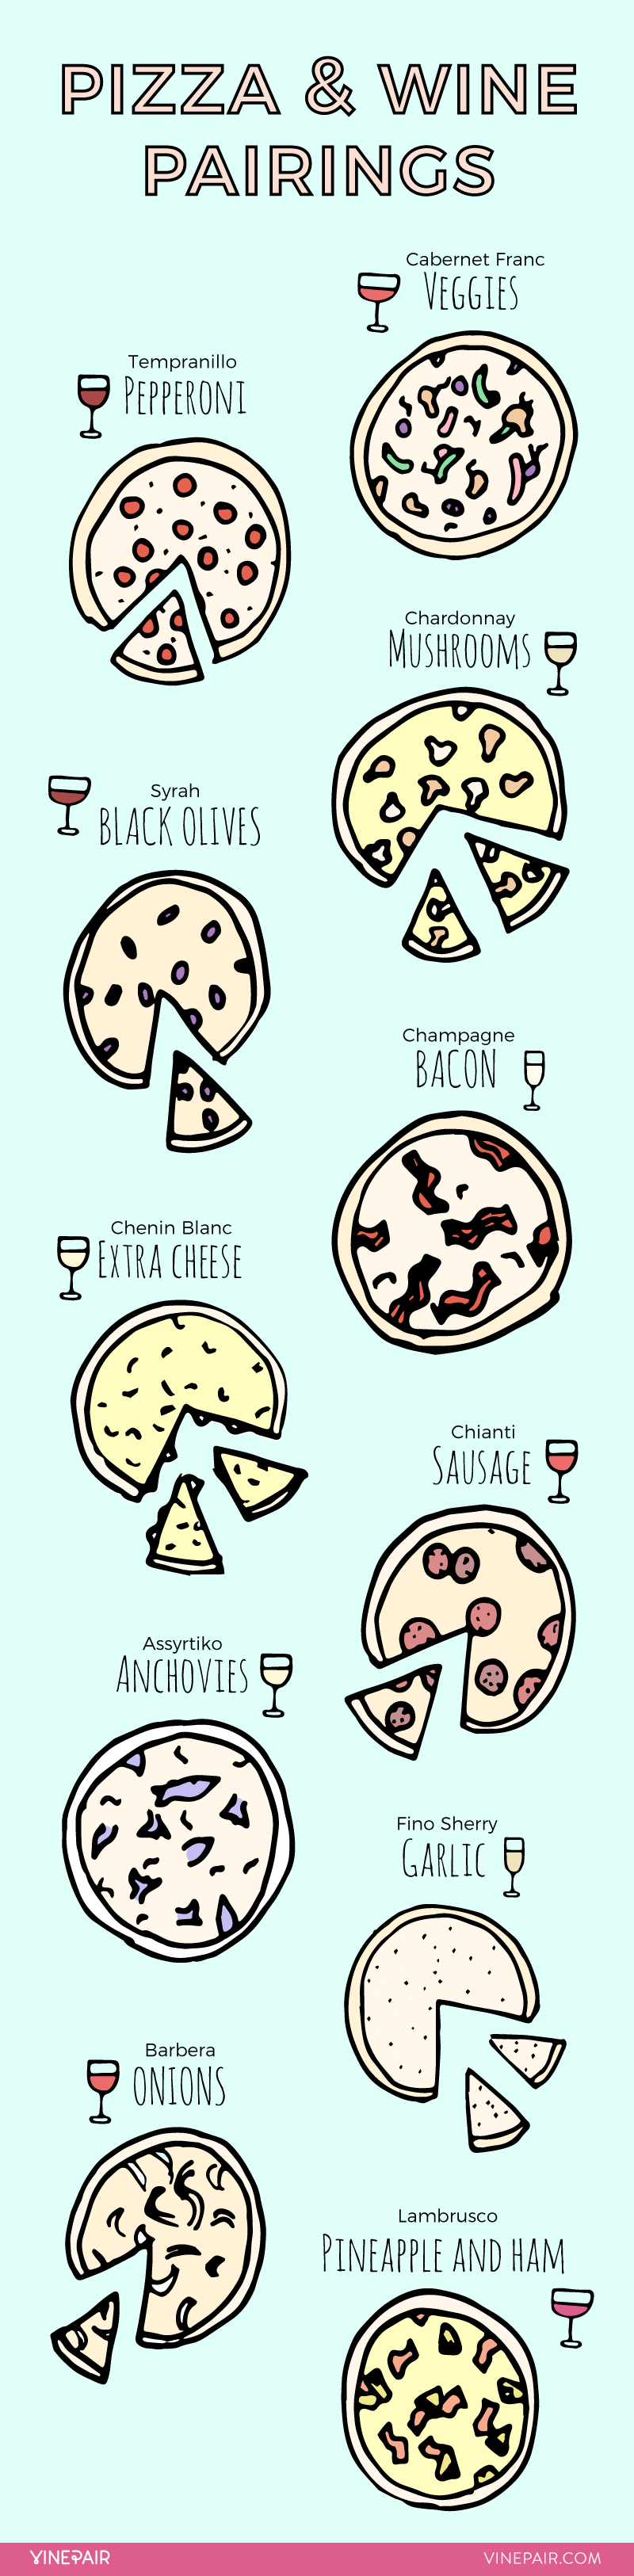 Wine pairings for every type of pizza